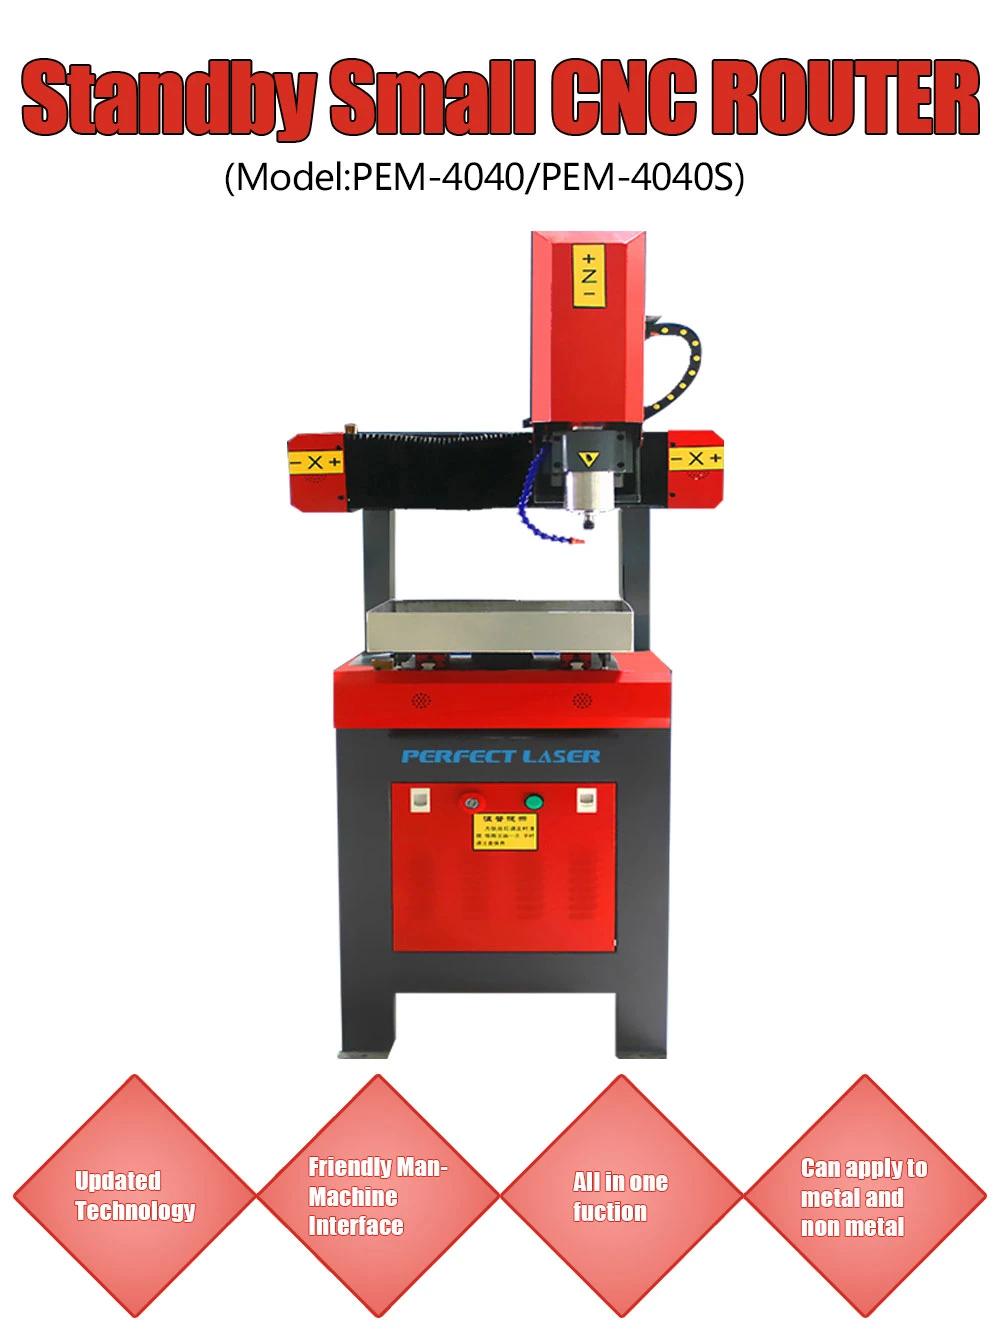 Factory Supply Automatic CNC 3D Computerized Wood Carving Machine